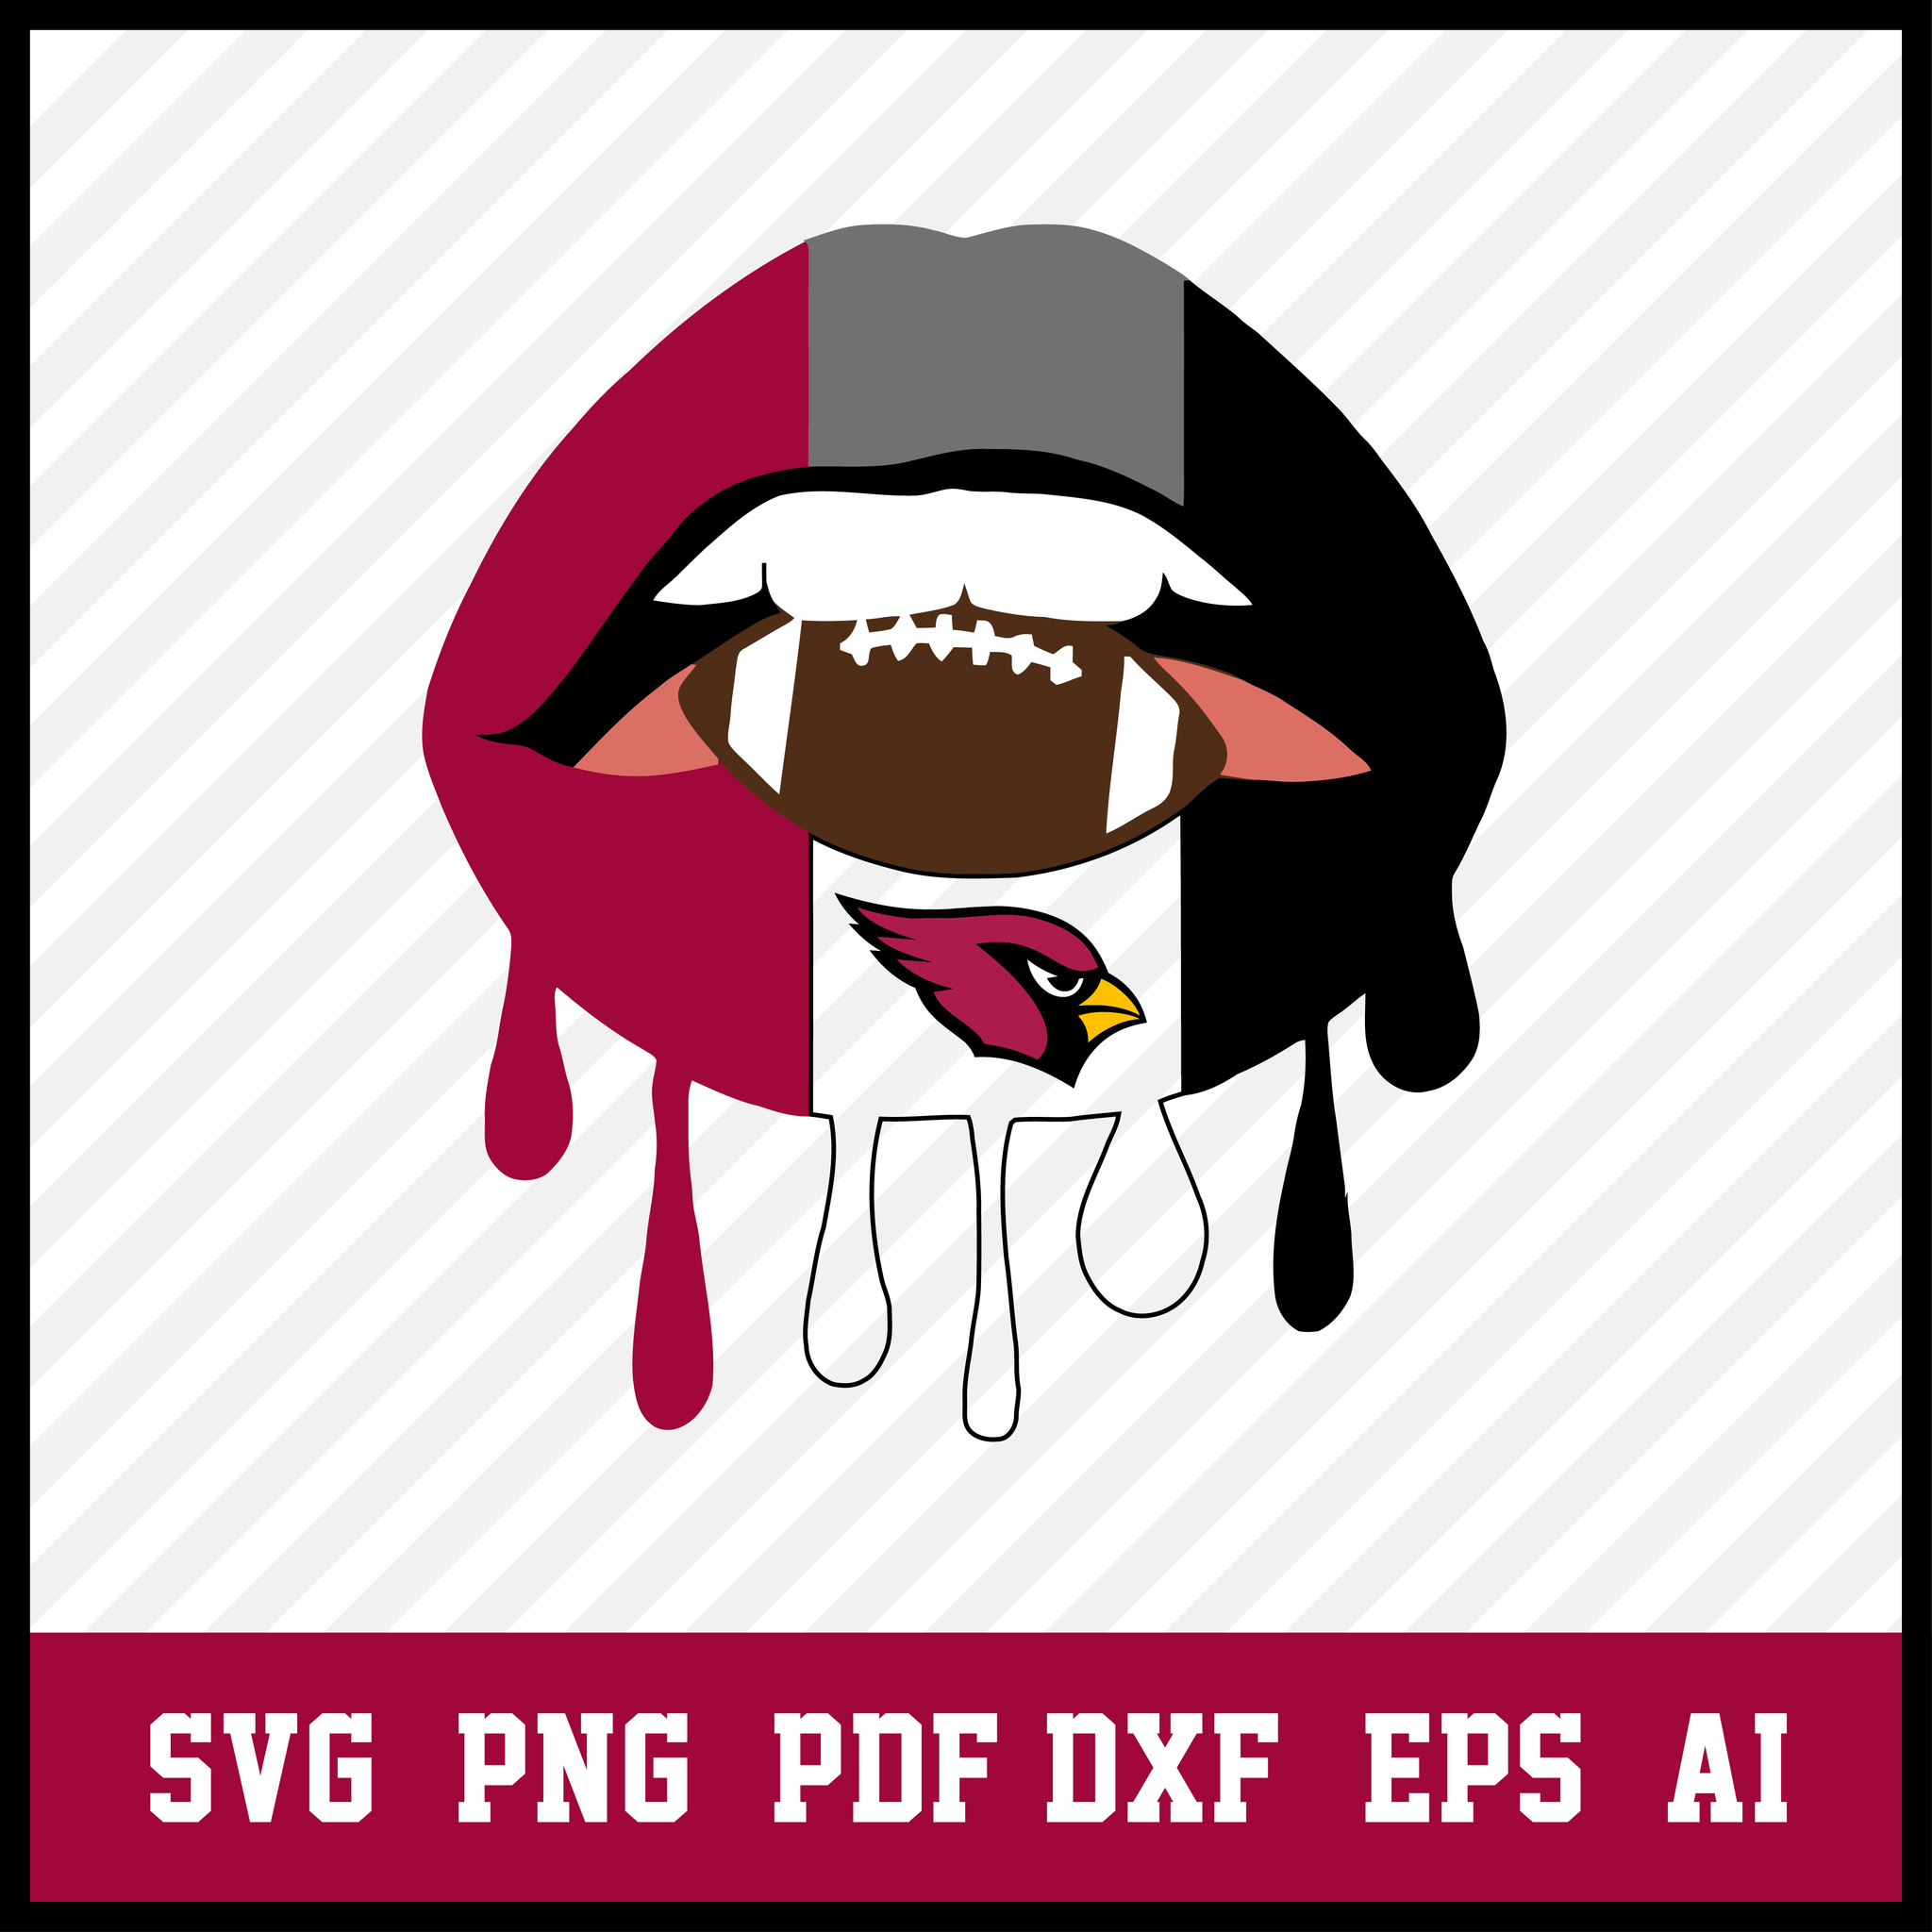 Lips svg, Arizona Cardinals Lips svg, Arizona Cardinals Lips svg, png, dxf, football svg, NFL svg for cricut  • INSTANT Digital DOWNLOAD includes: 1 Zip and the following file formats: SVG, DXF, PNG, AI, PDF